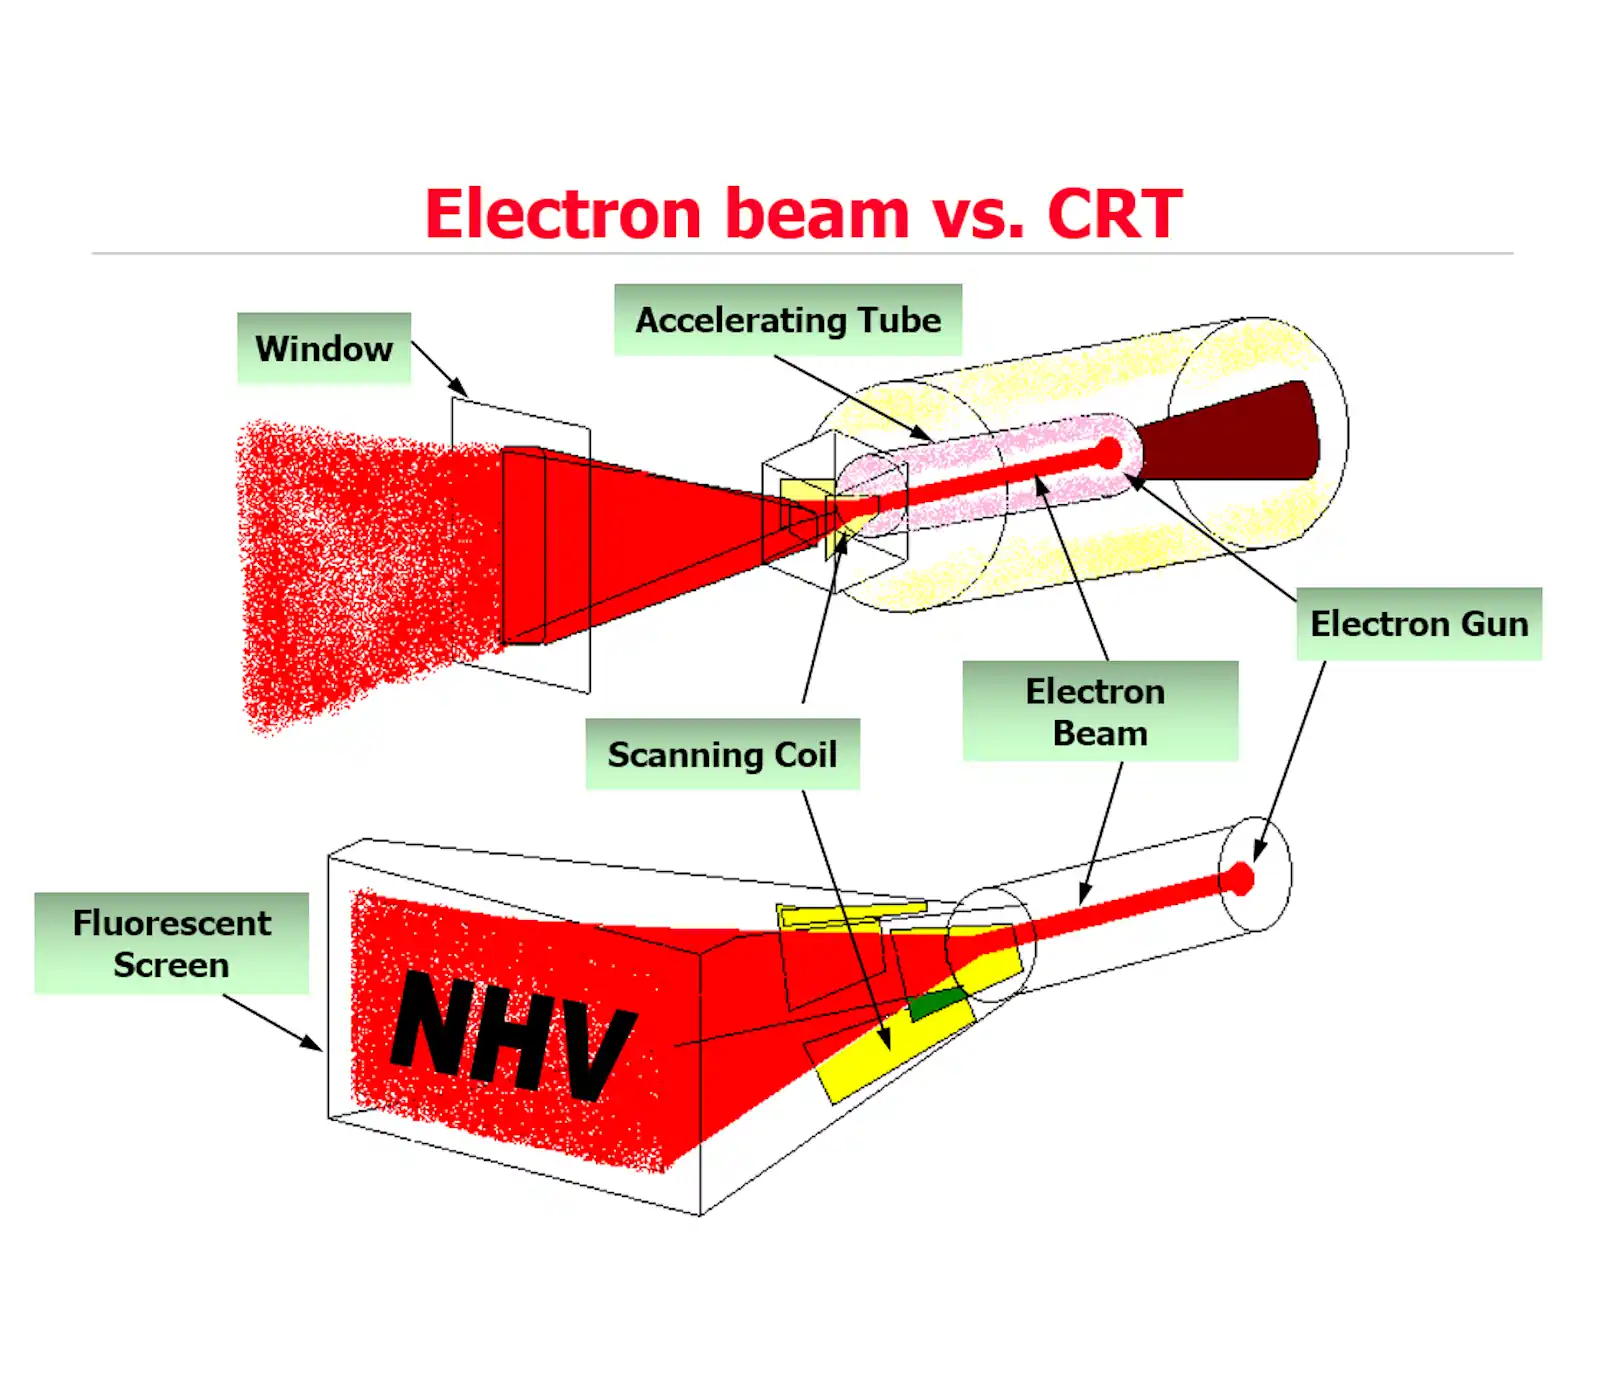 Similarities between Electron Beam Radiation and Cathode-Ray Tube (CRT)